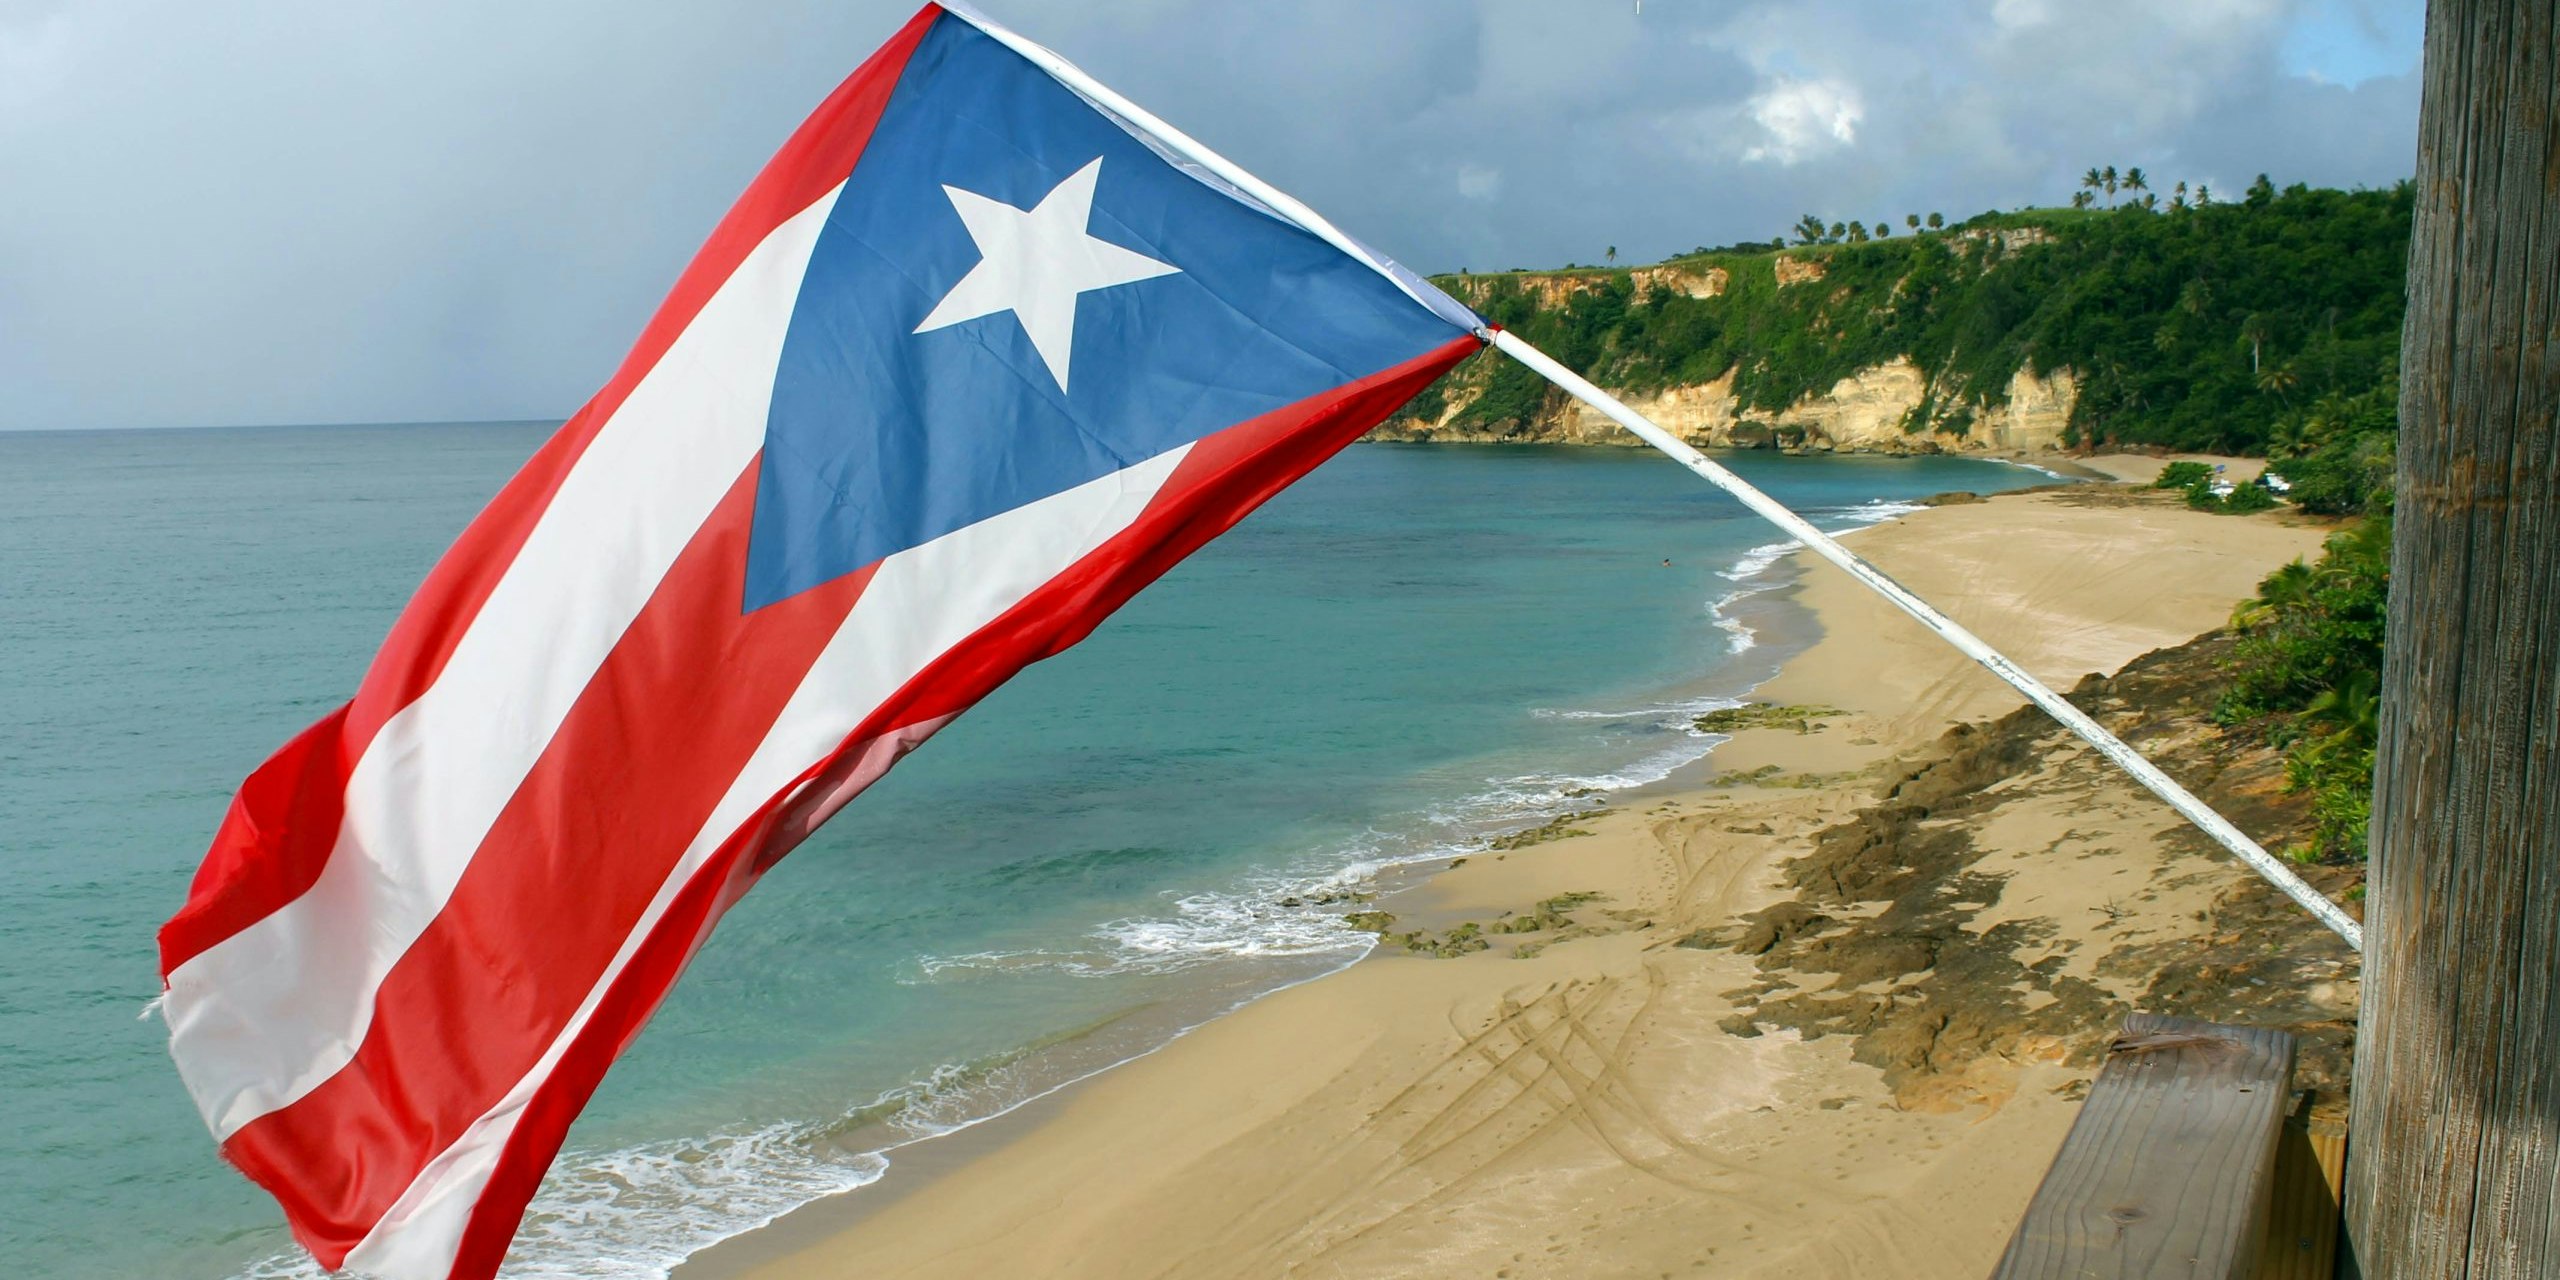 Puerto Rico: Culture and Service